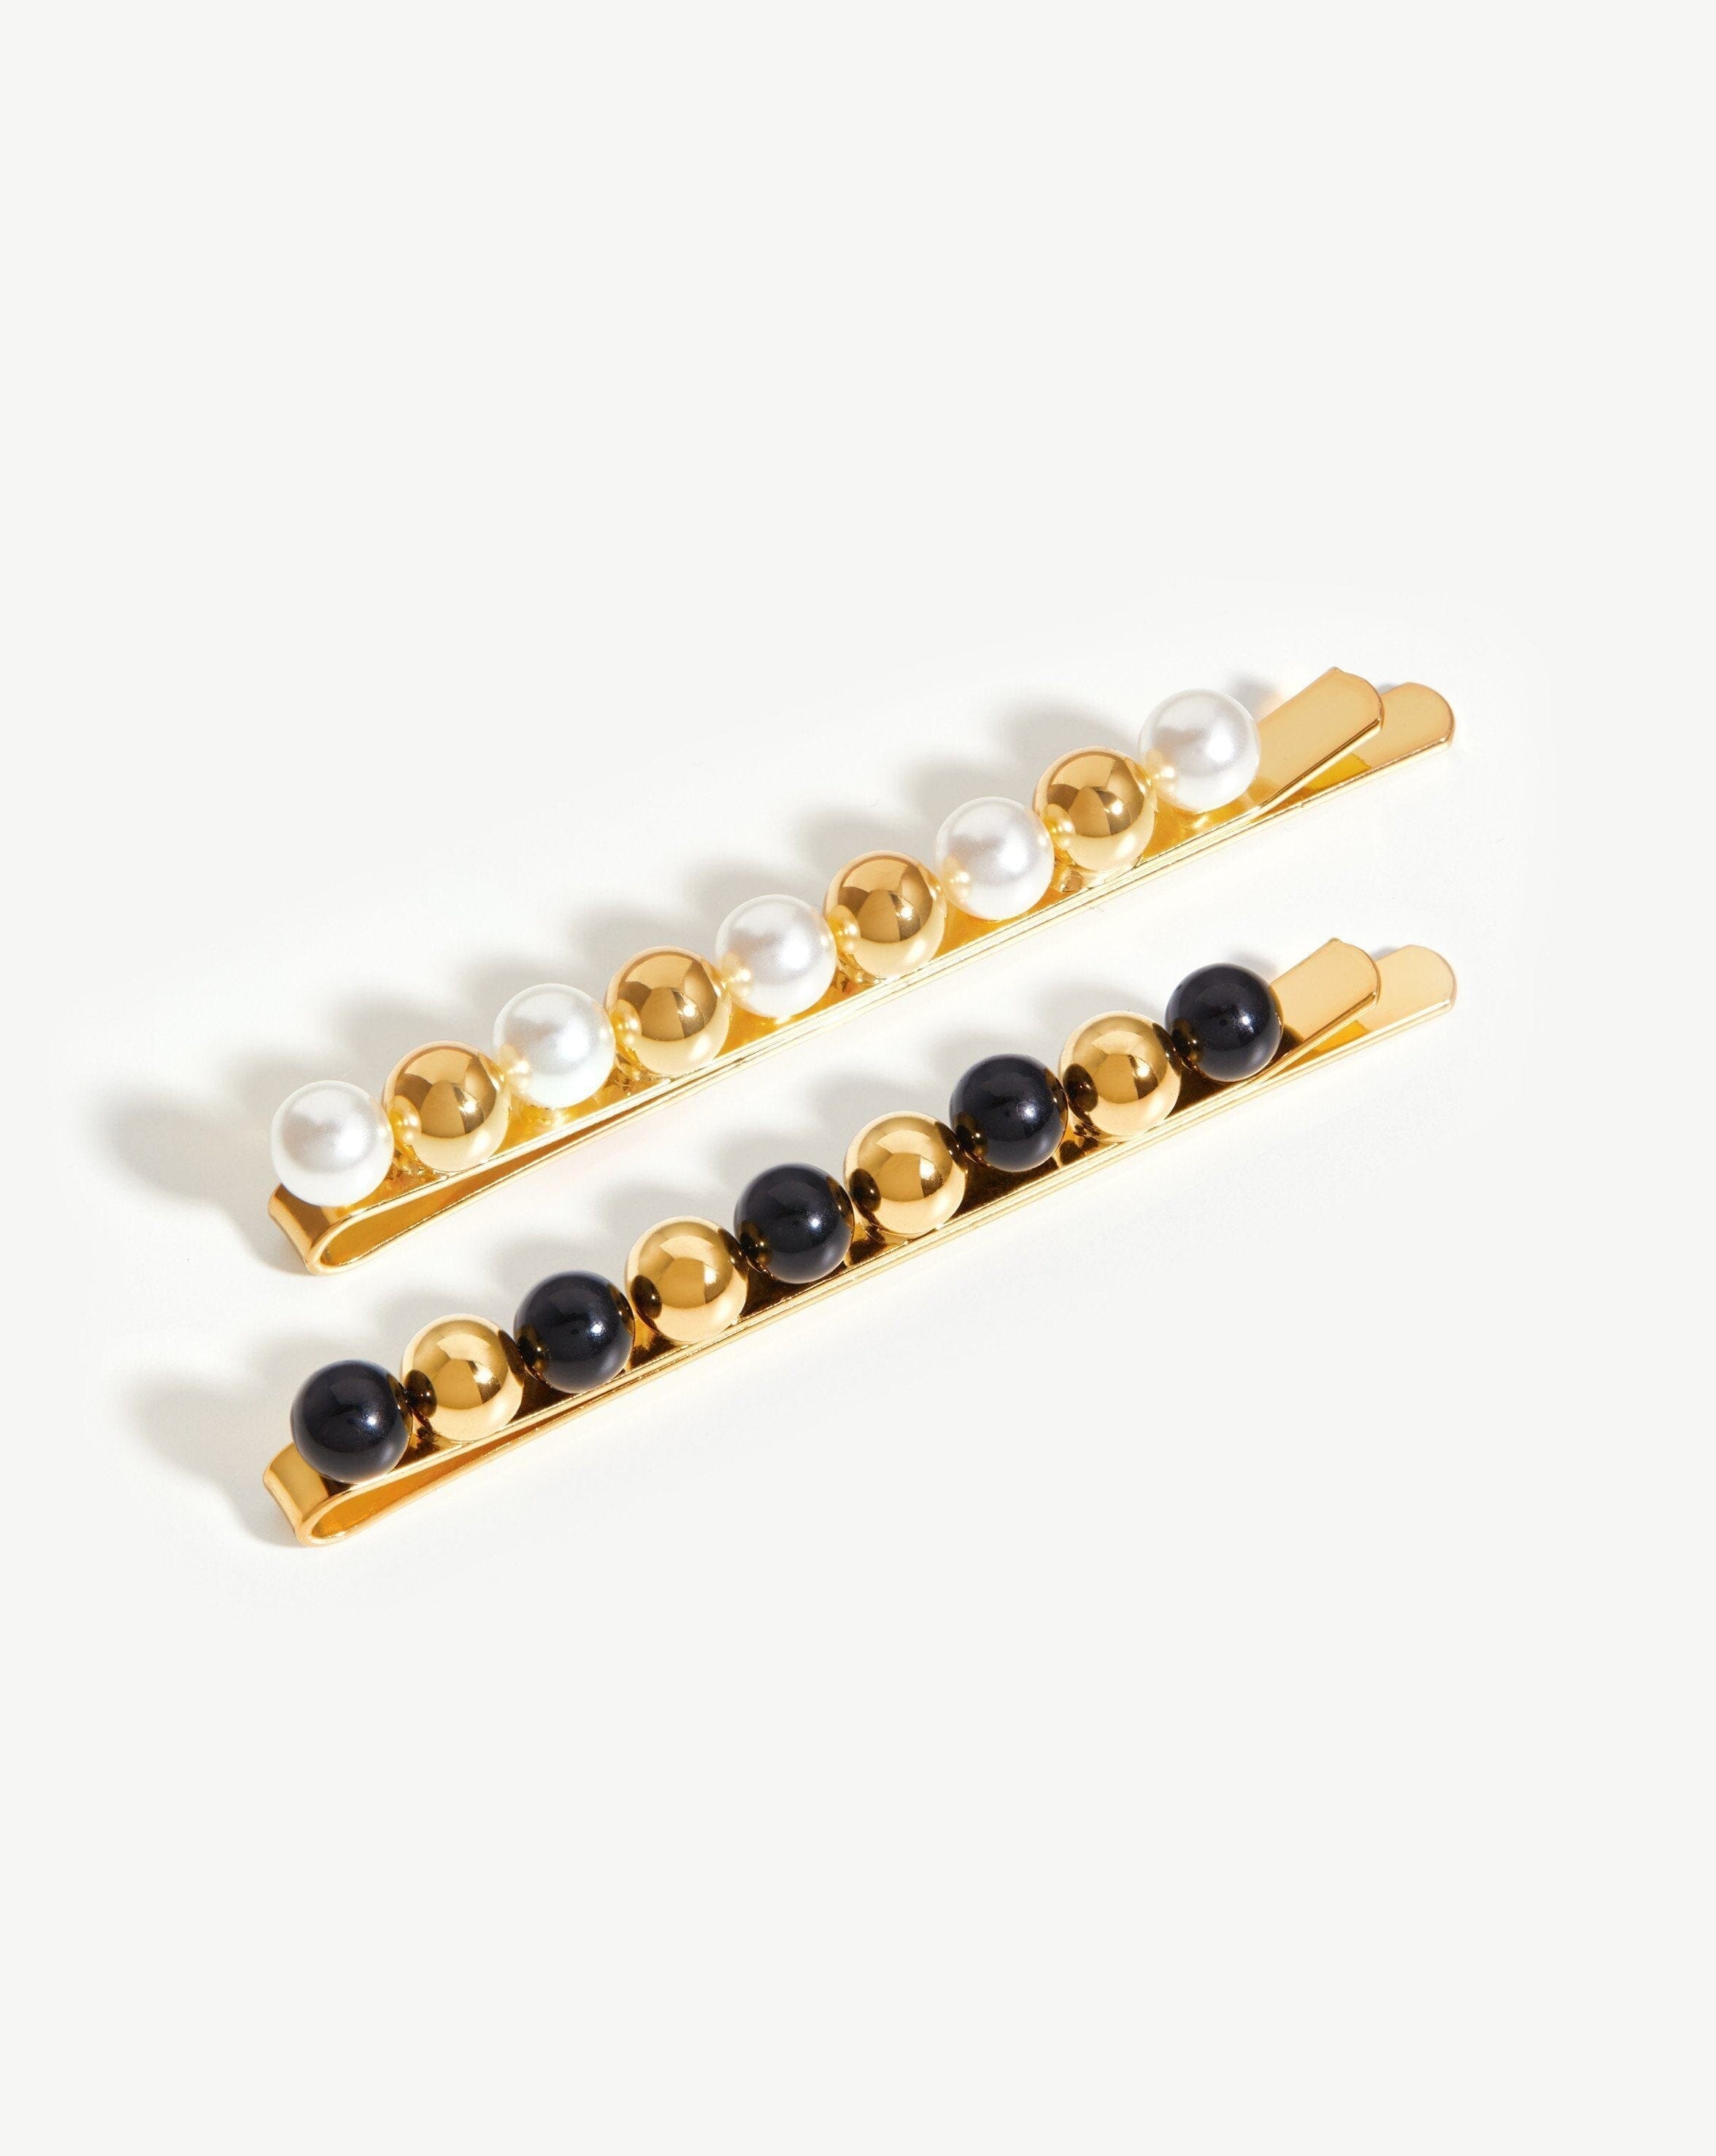 Mini Sphere Beaded Hair Clip Set | 18ct Gold Plated/Faux Pearl and Black Bead Hair Clips Missoma 